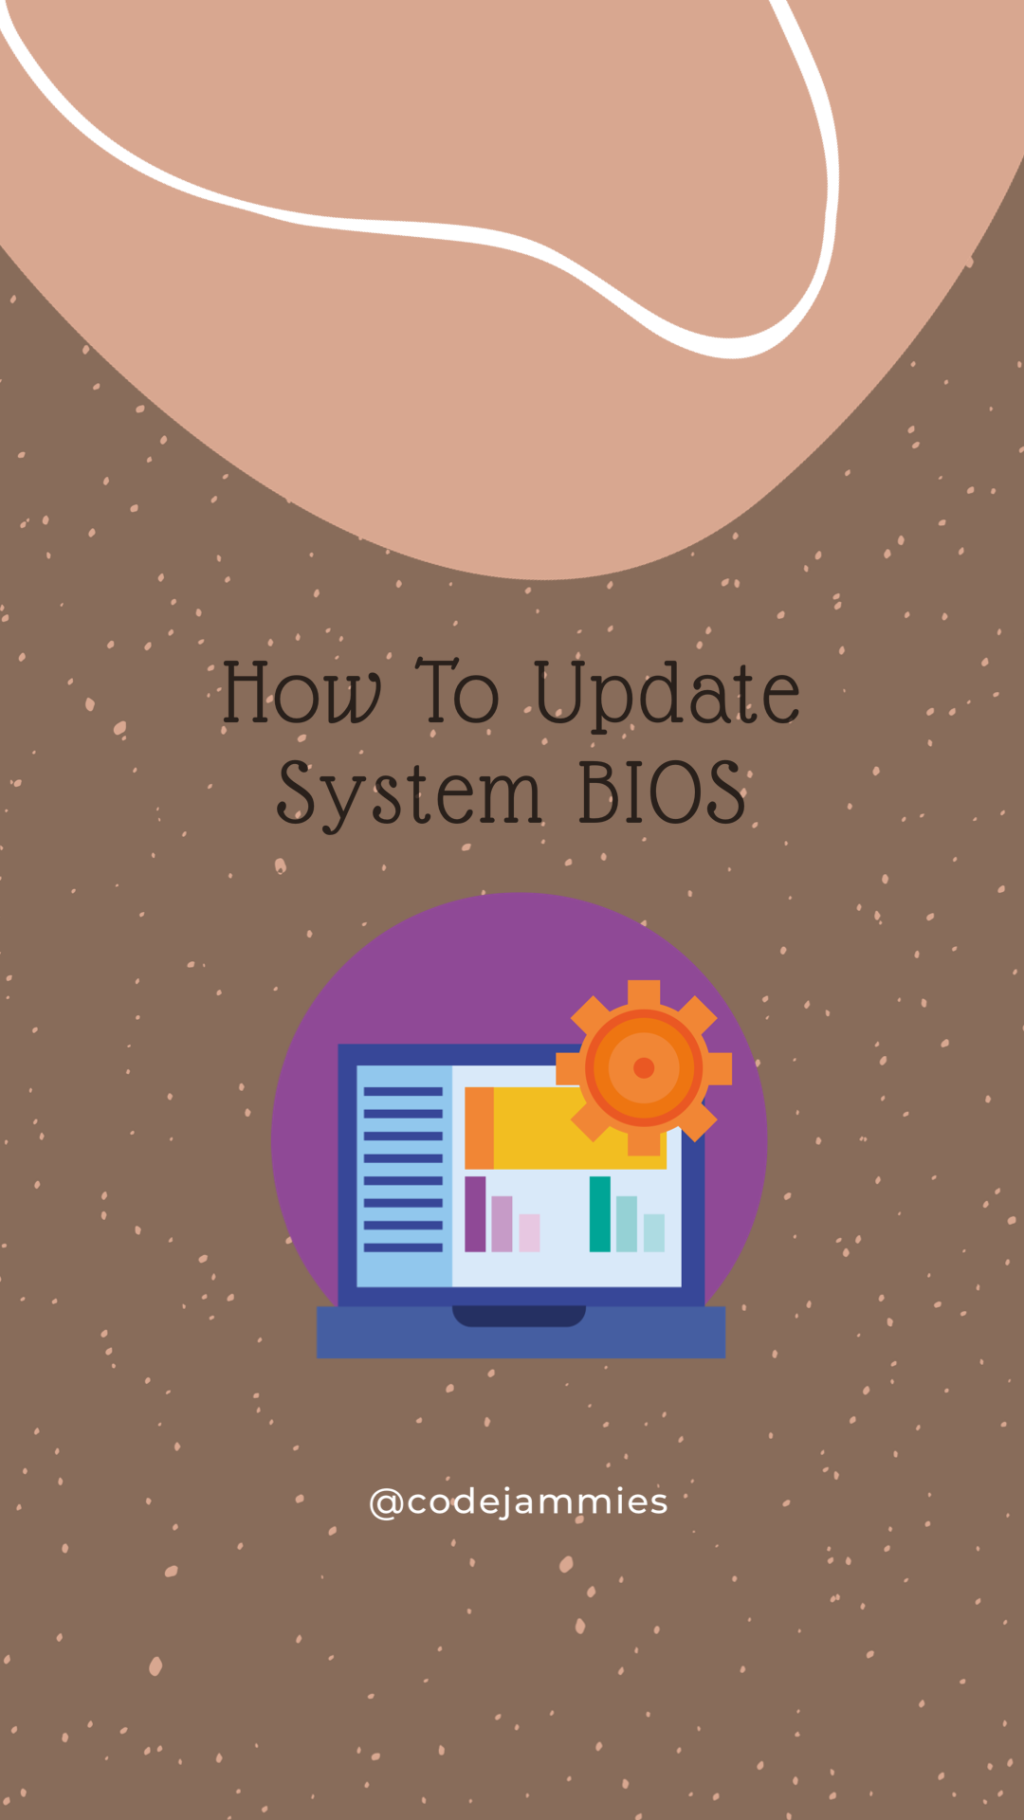 How to update System BIOS